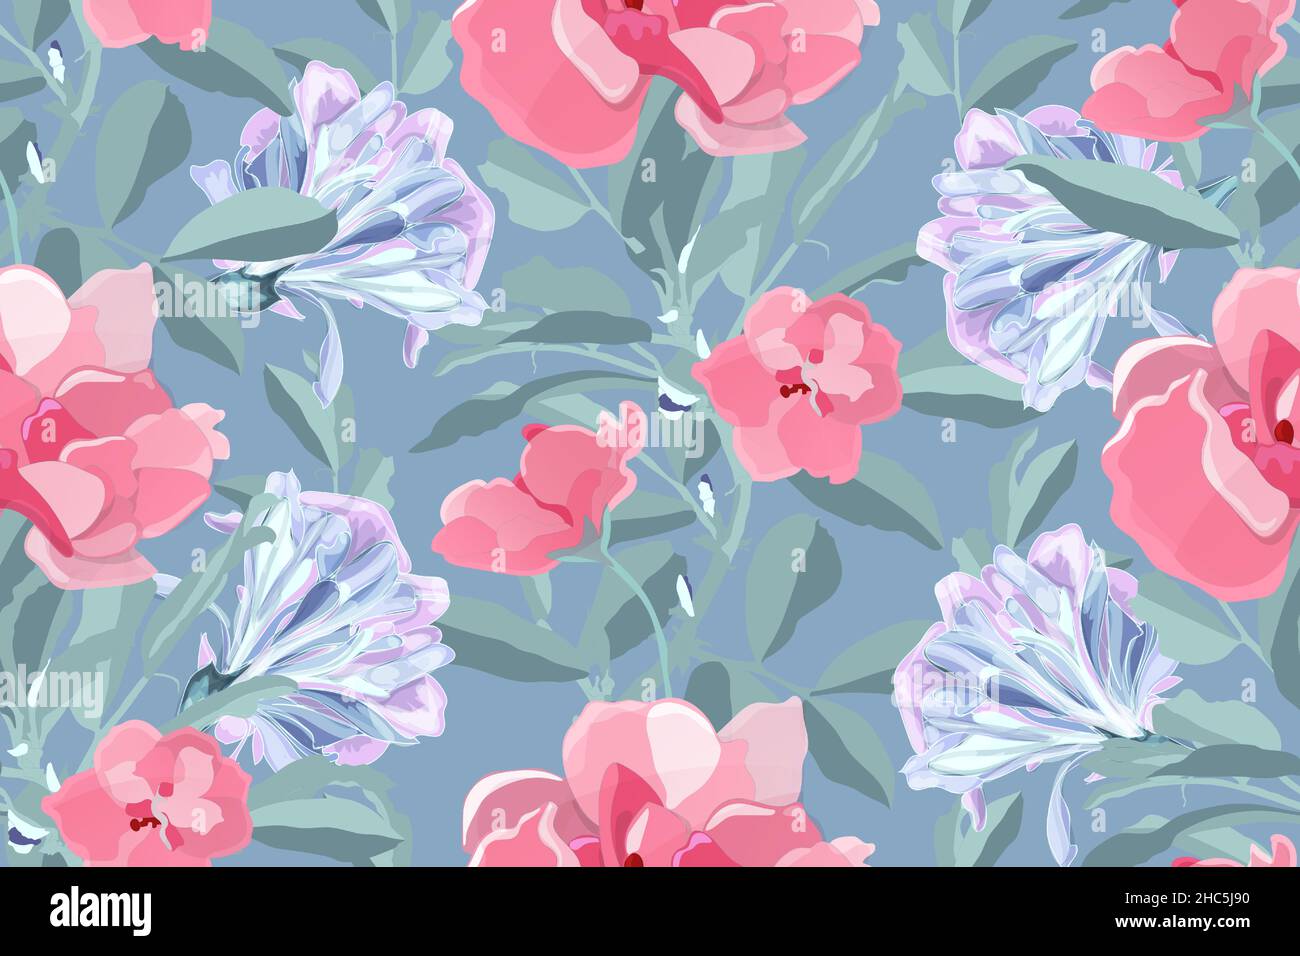 Art floral vector seamless pattern. Pink flowers. Stock Vector